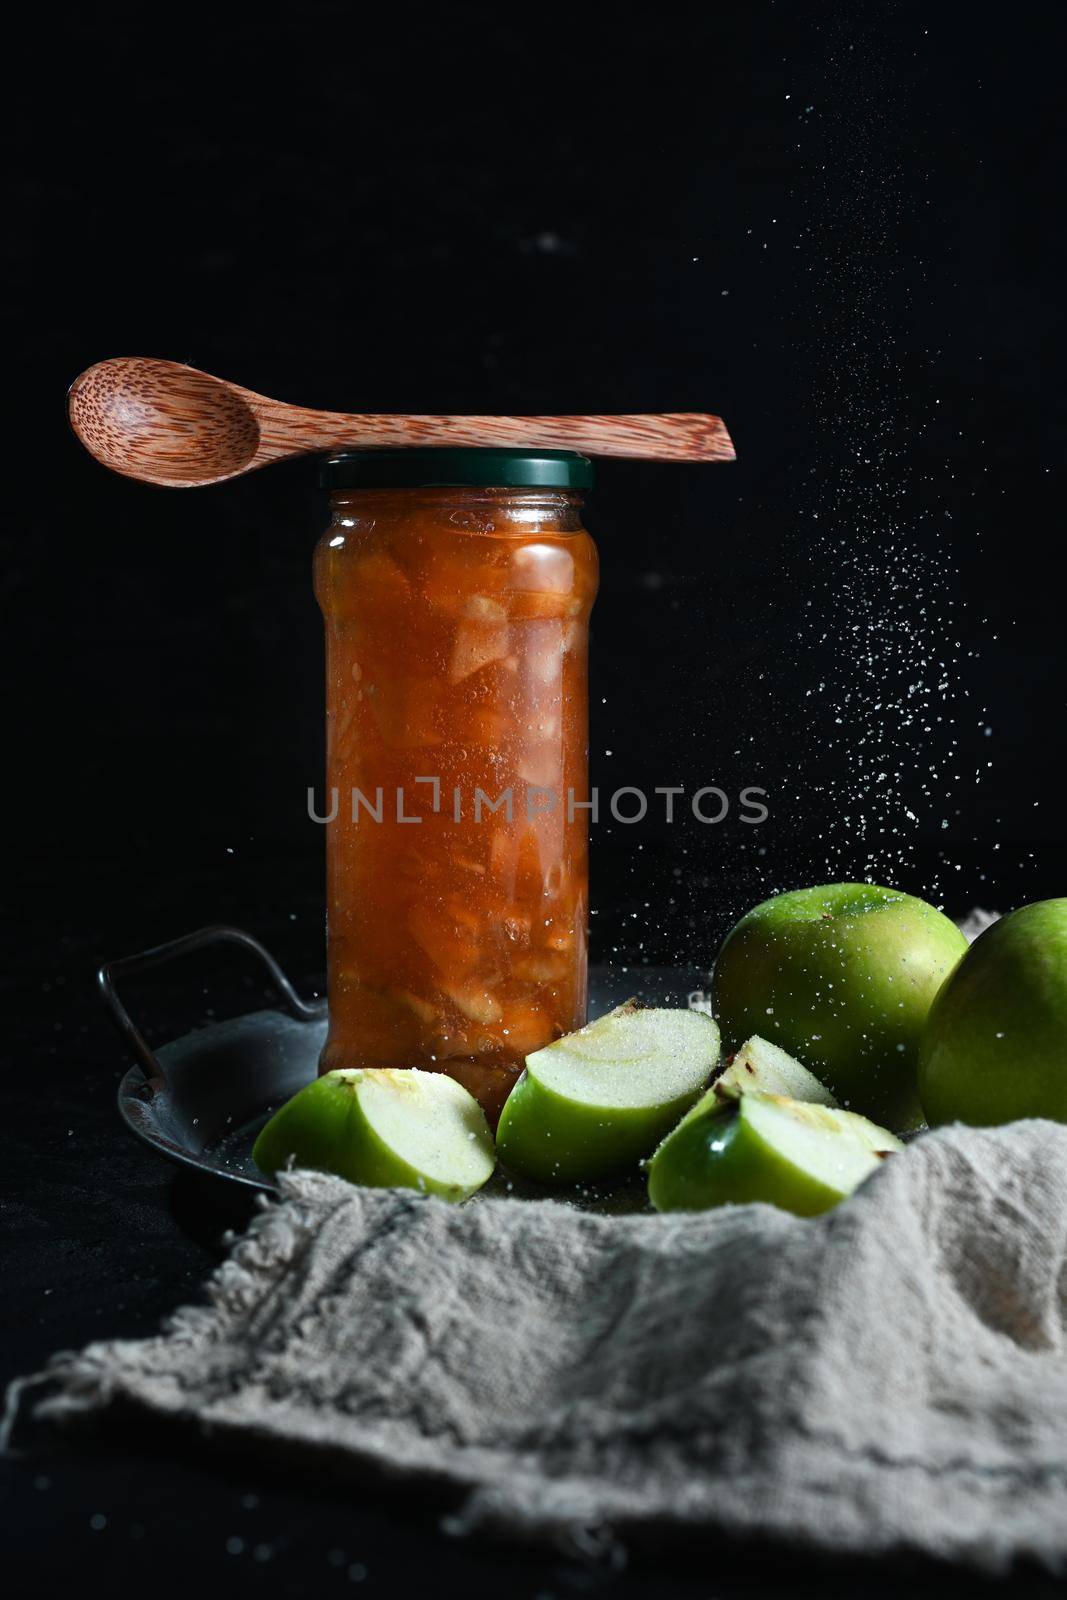 Homemade Apples jam. style rustic. selective focus by sashokddt